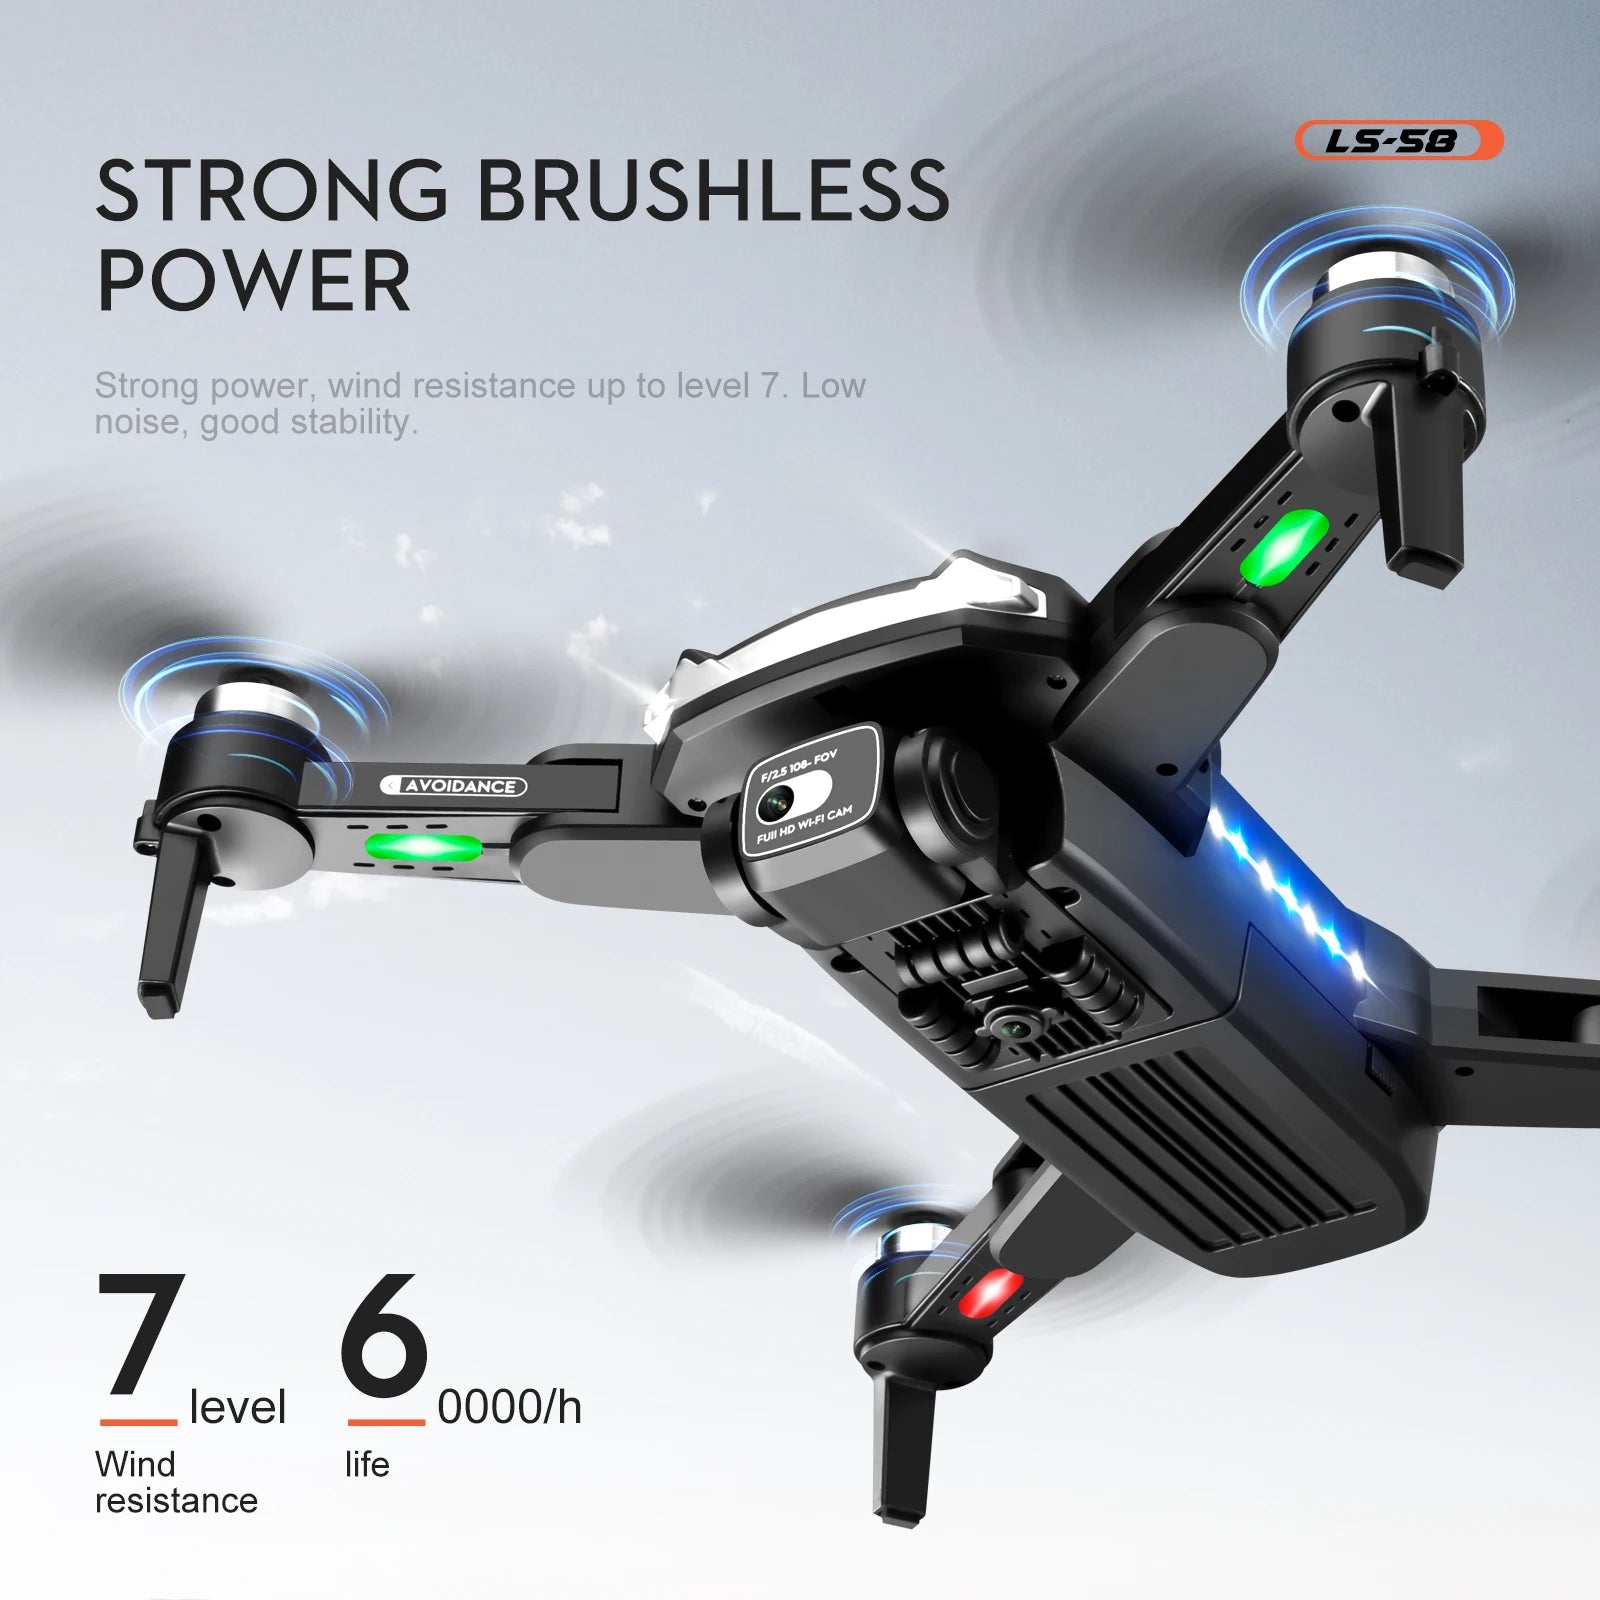 LS58 Drone, Ls-5o STRONG BRUSHLESS POWER Strong power; wind resistance